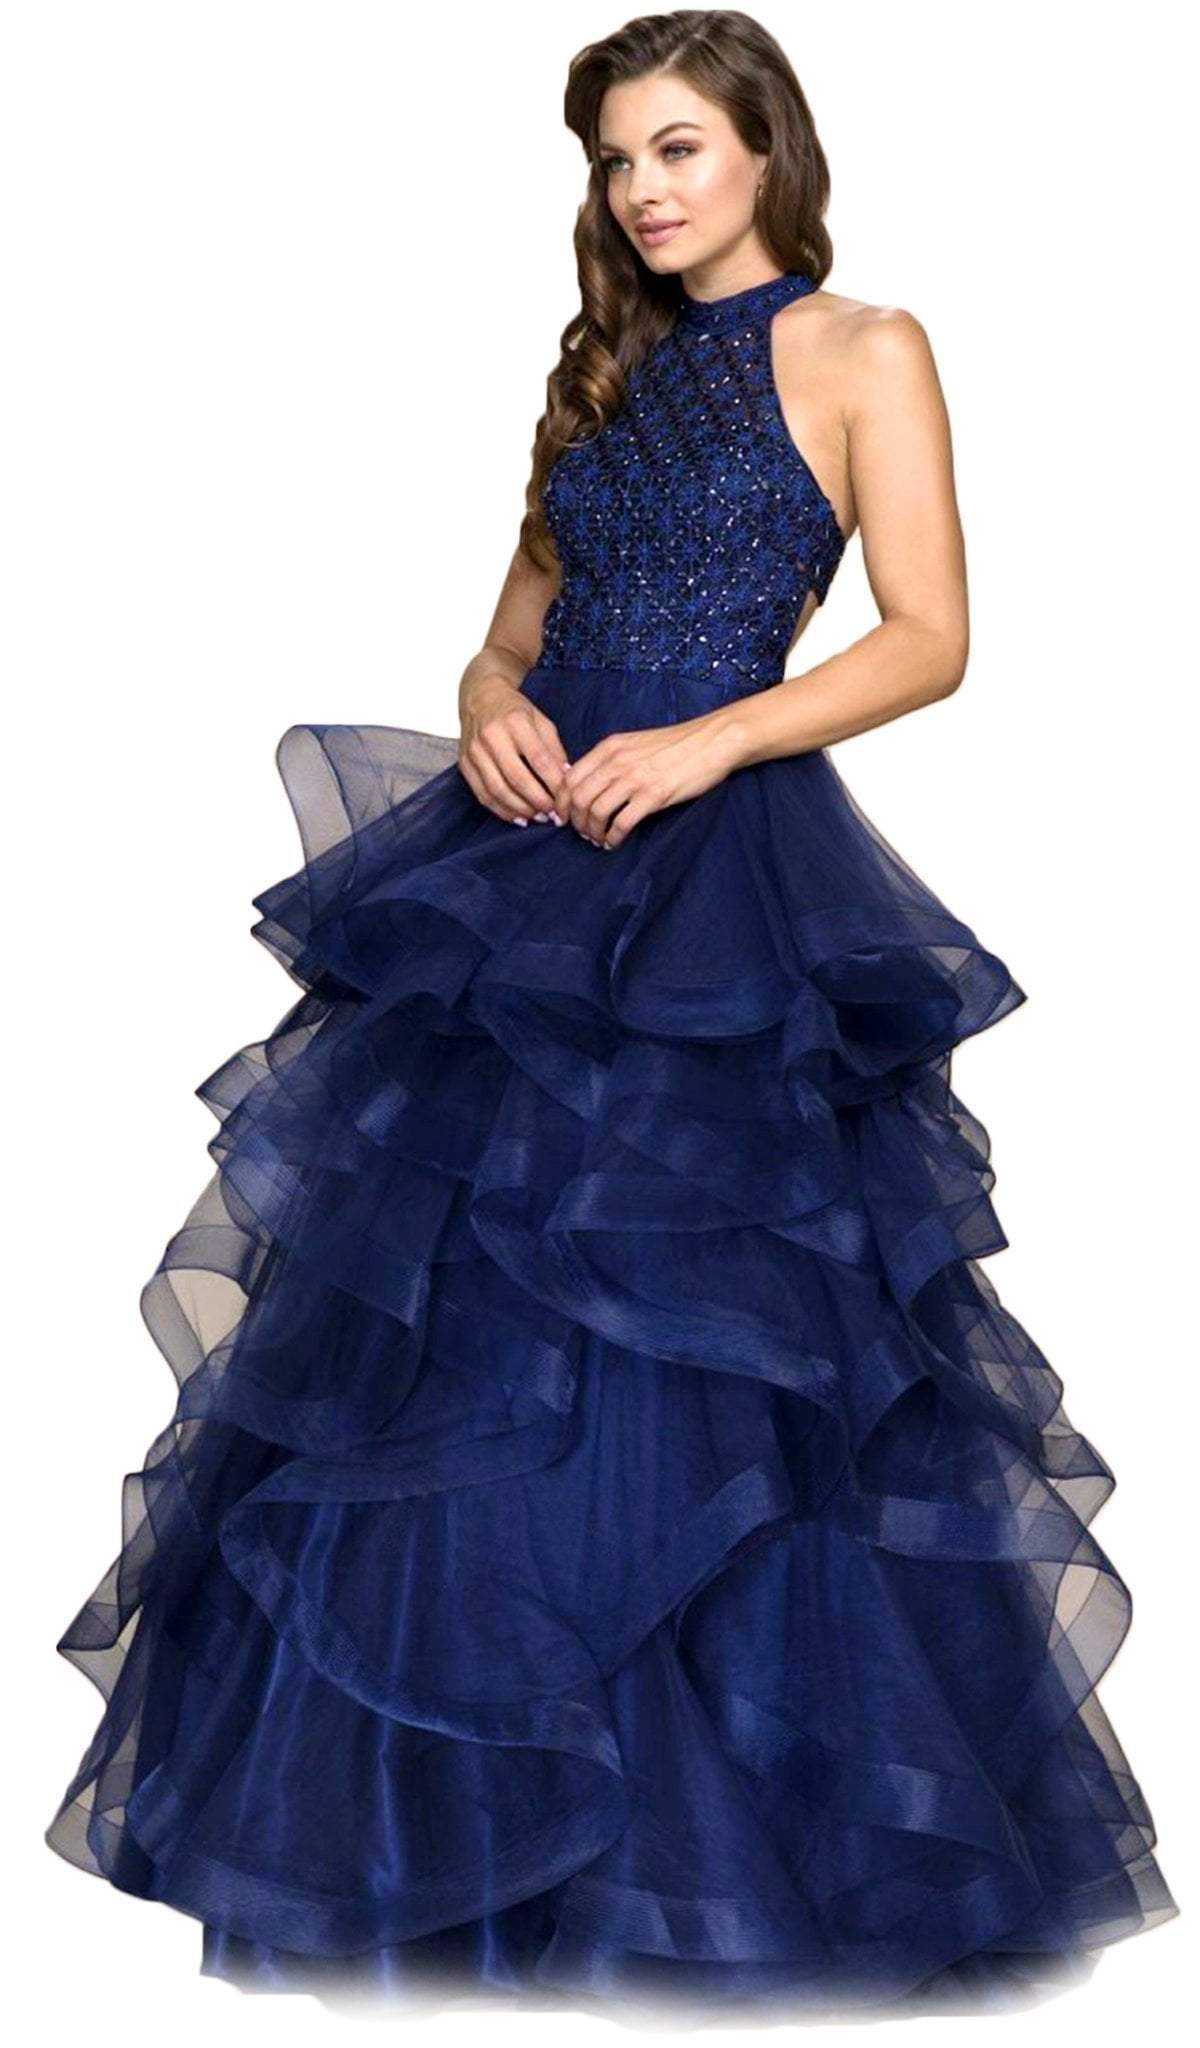 Nox Anabel - A065SC Lattice Beaded High Halter Tiered Tulle Ballgown